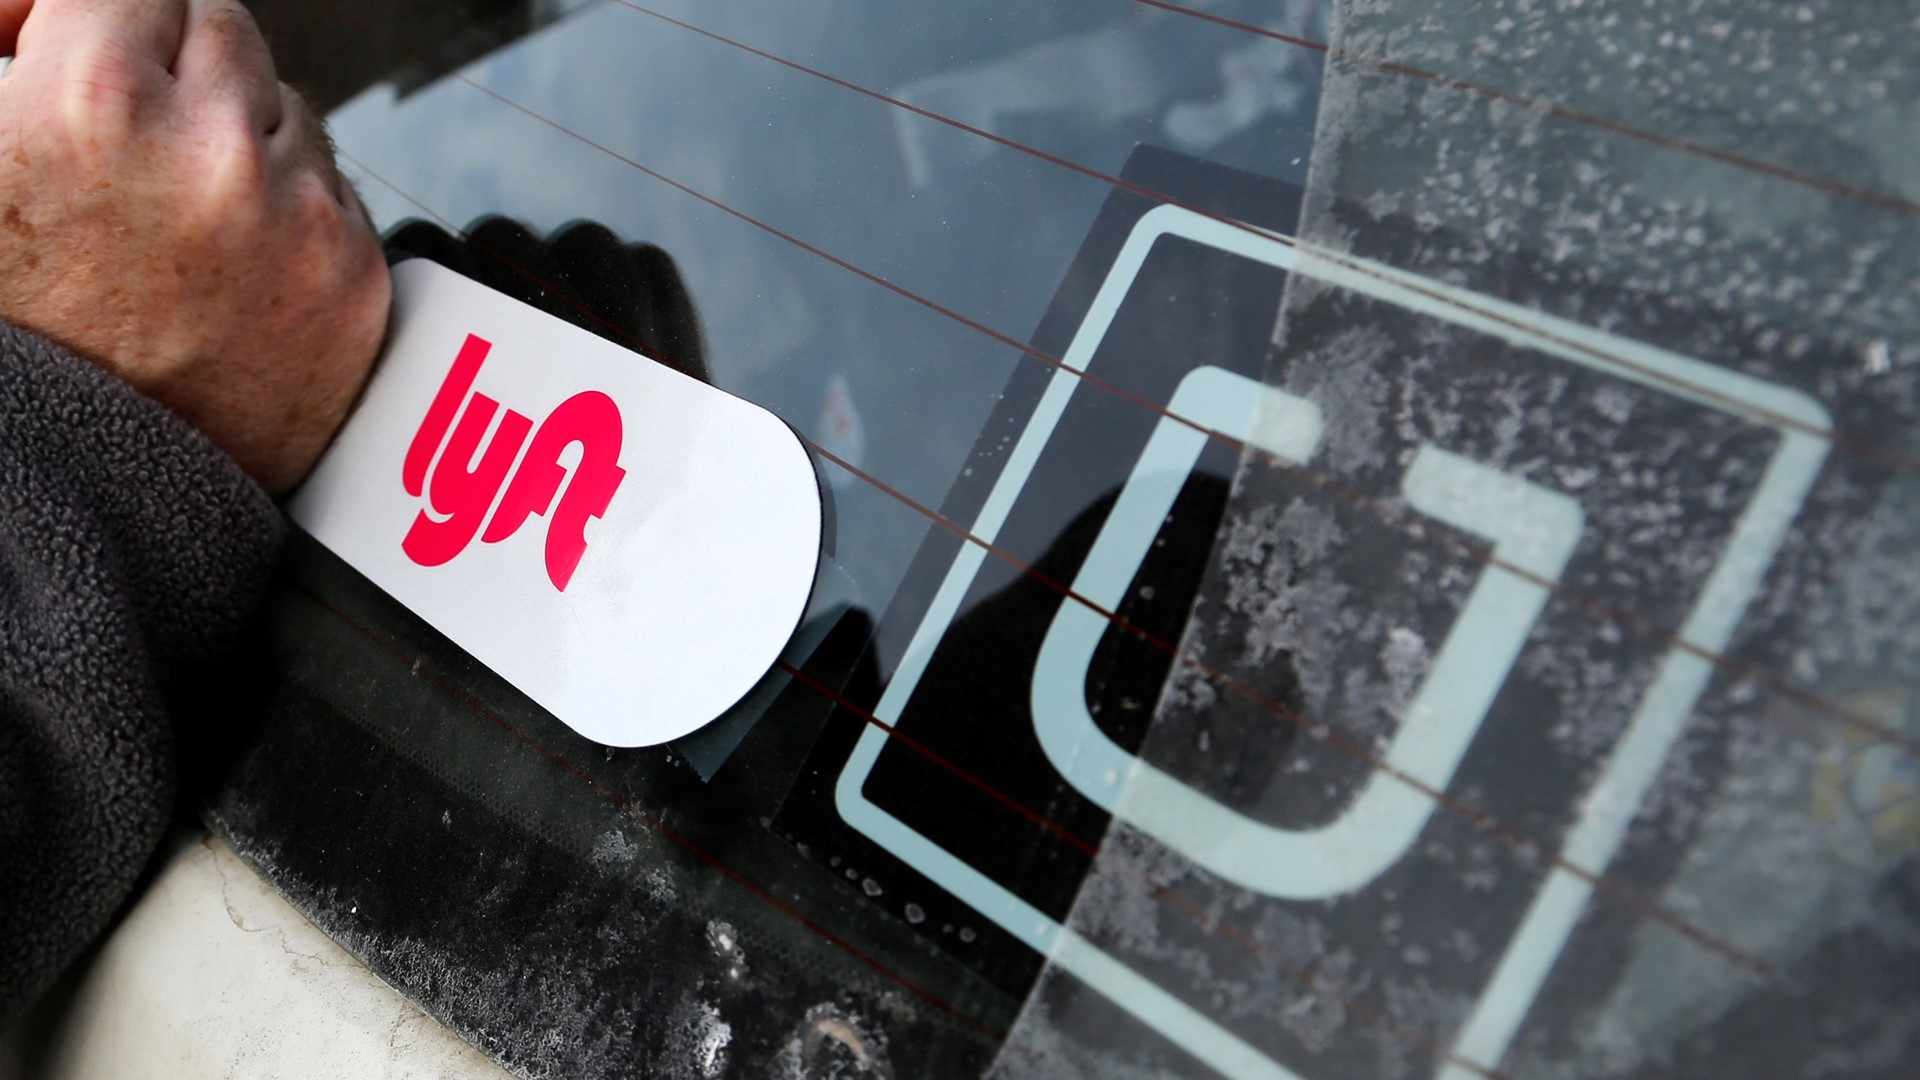 An assembly bill moving forward in the California legislature would significantly alter how the state’s emerging, and largely unregulated, app-based “gig economy” operates.